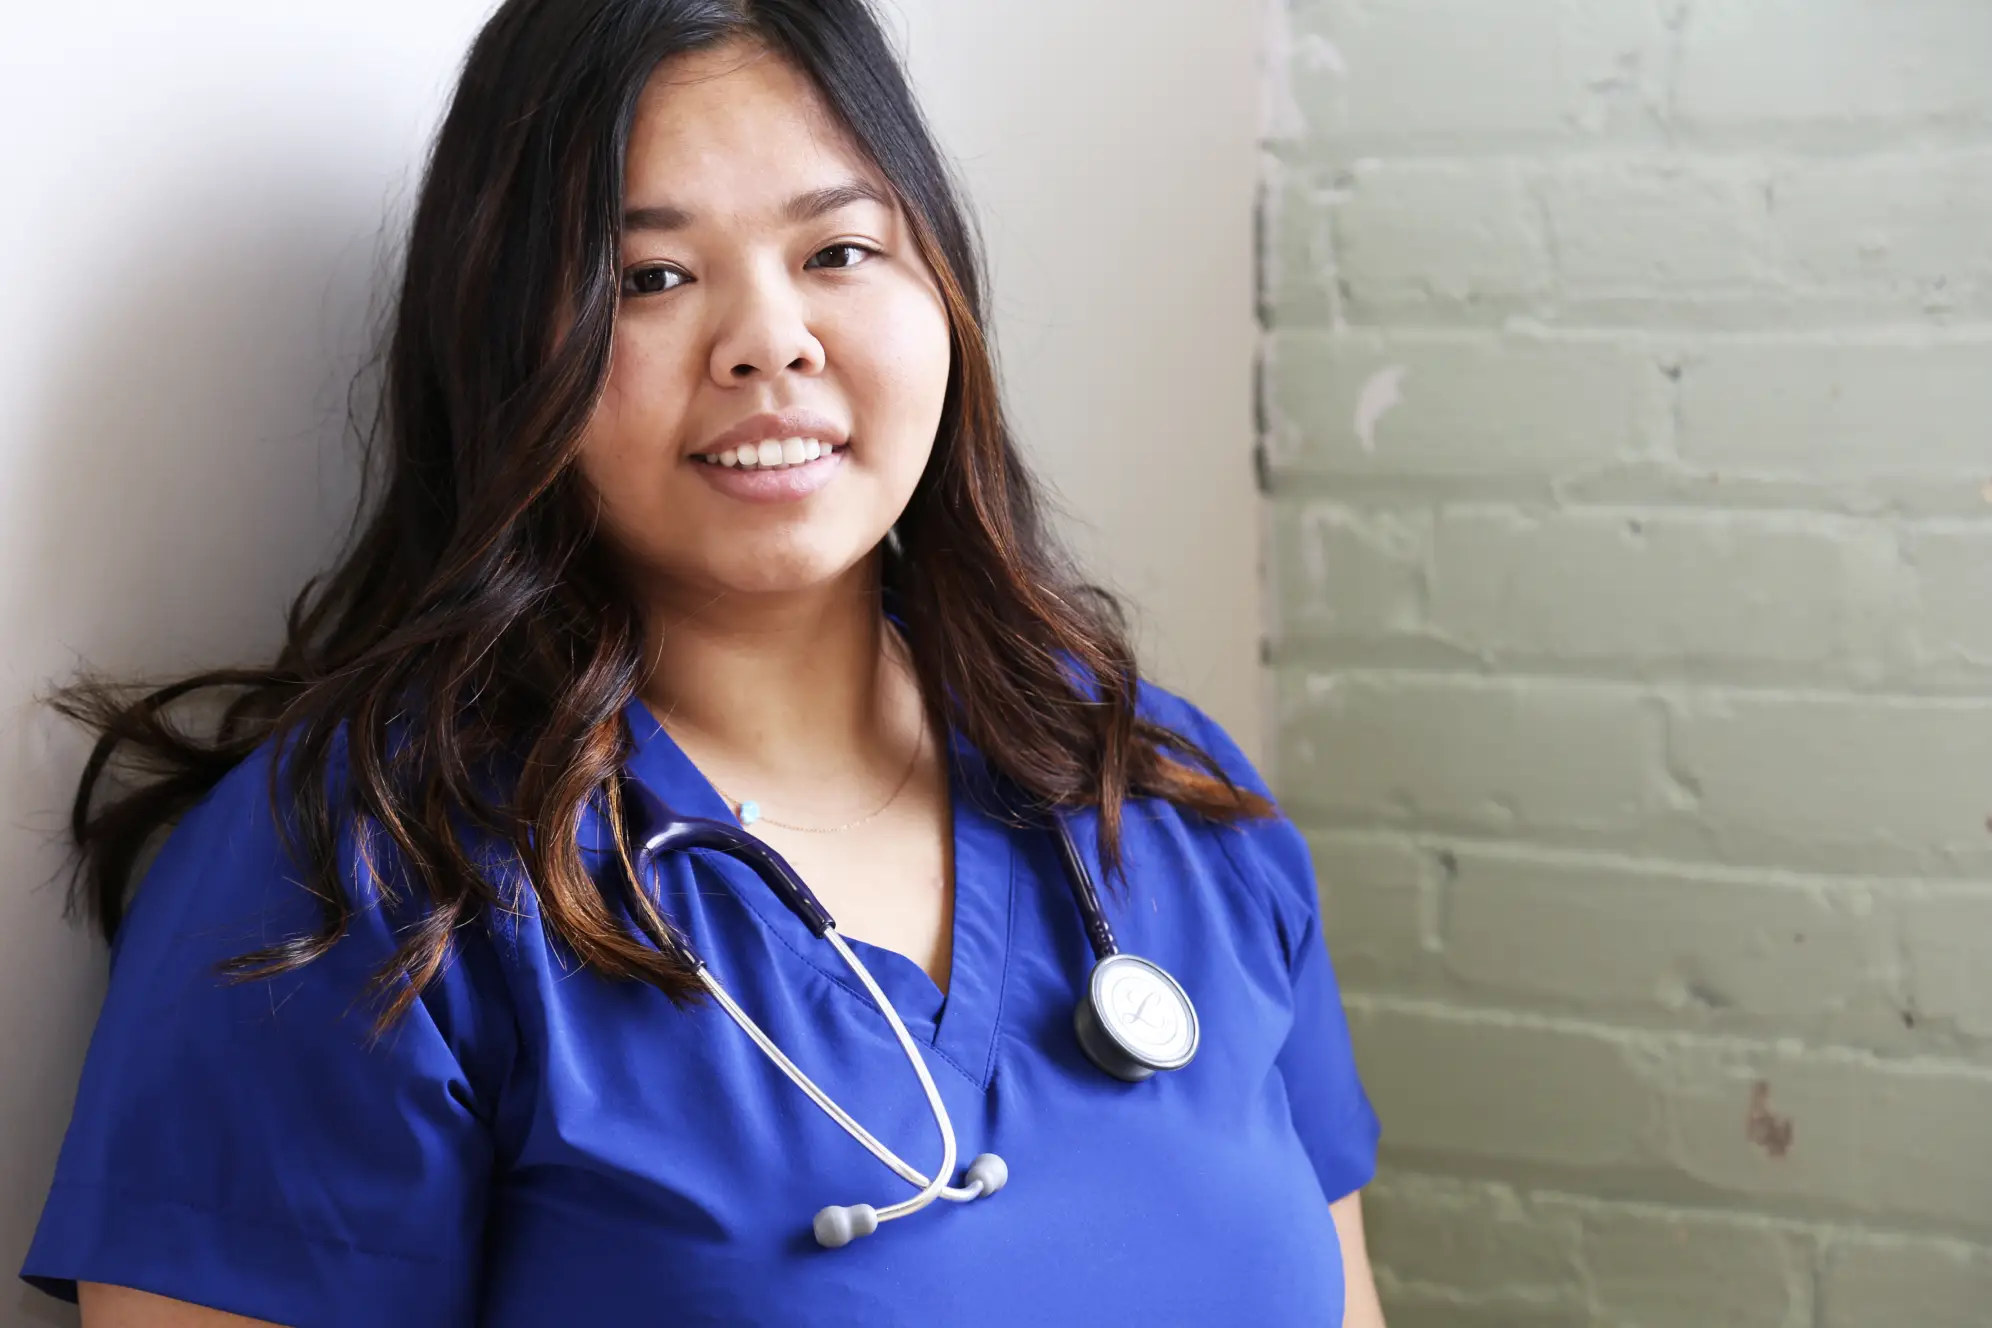 Young woman leaning against white wall wearing dark blue scrubs and smiling at camera